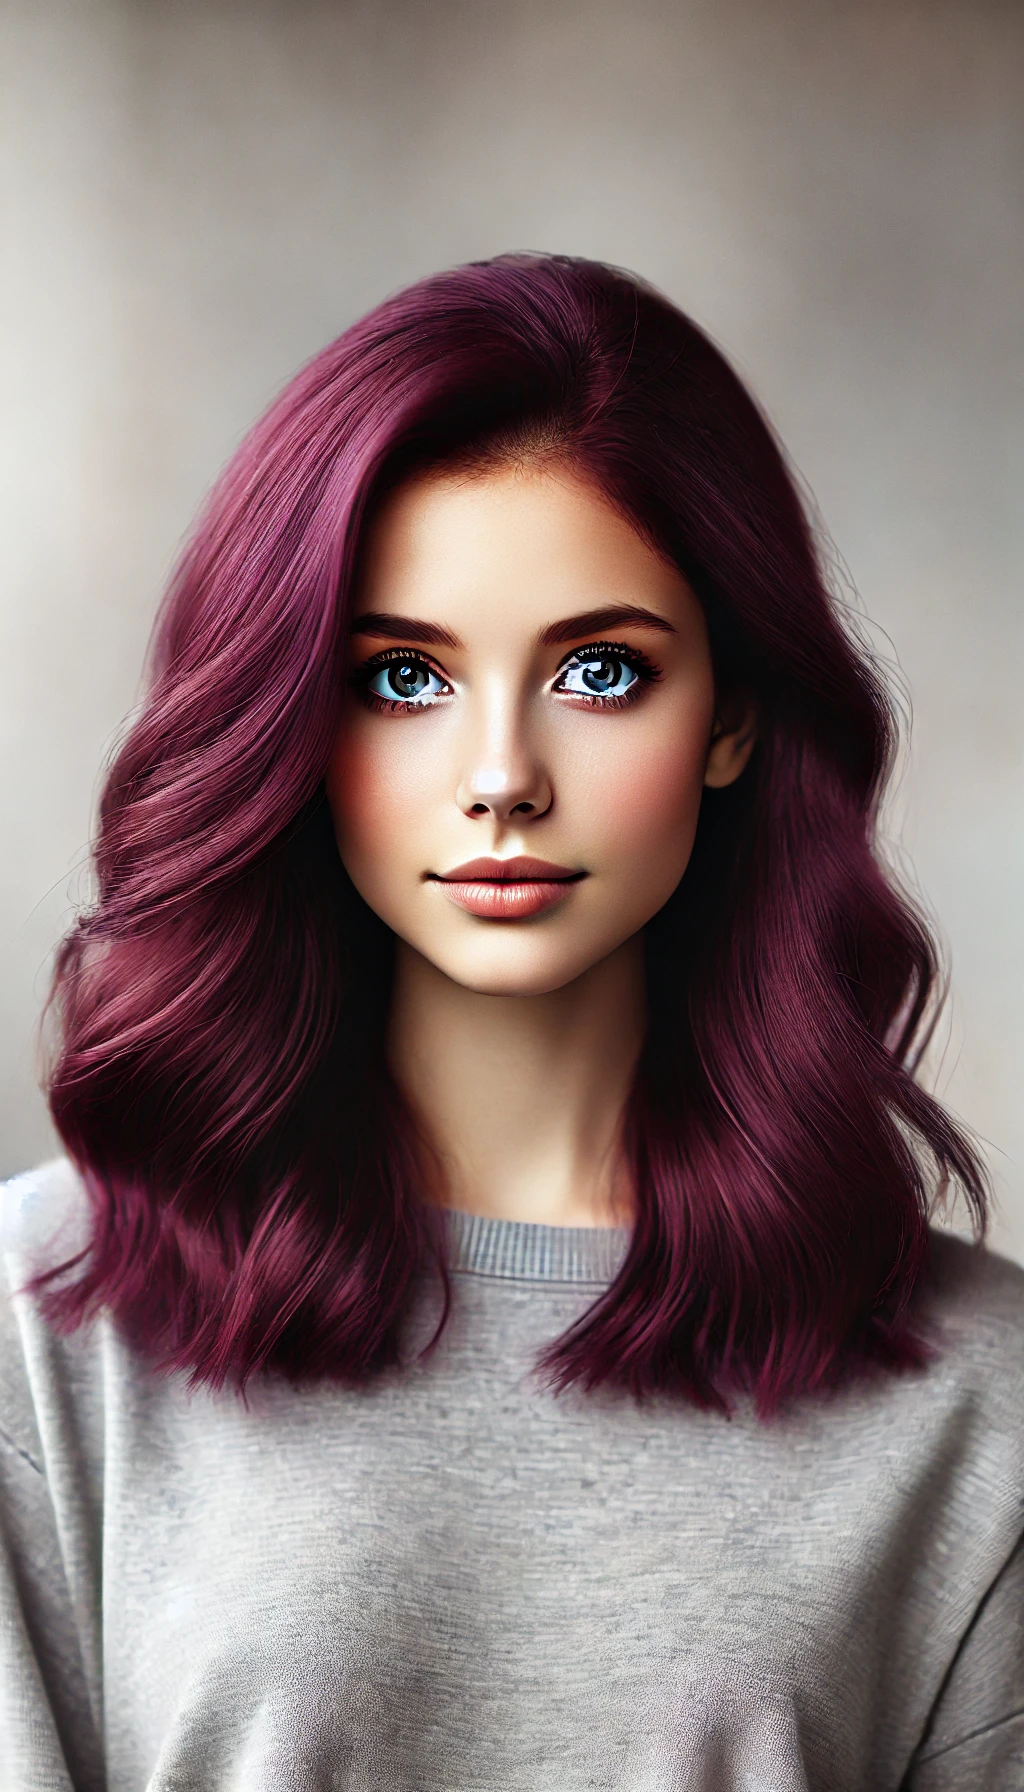 an image of a young woman with hair the color of a beet